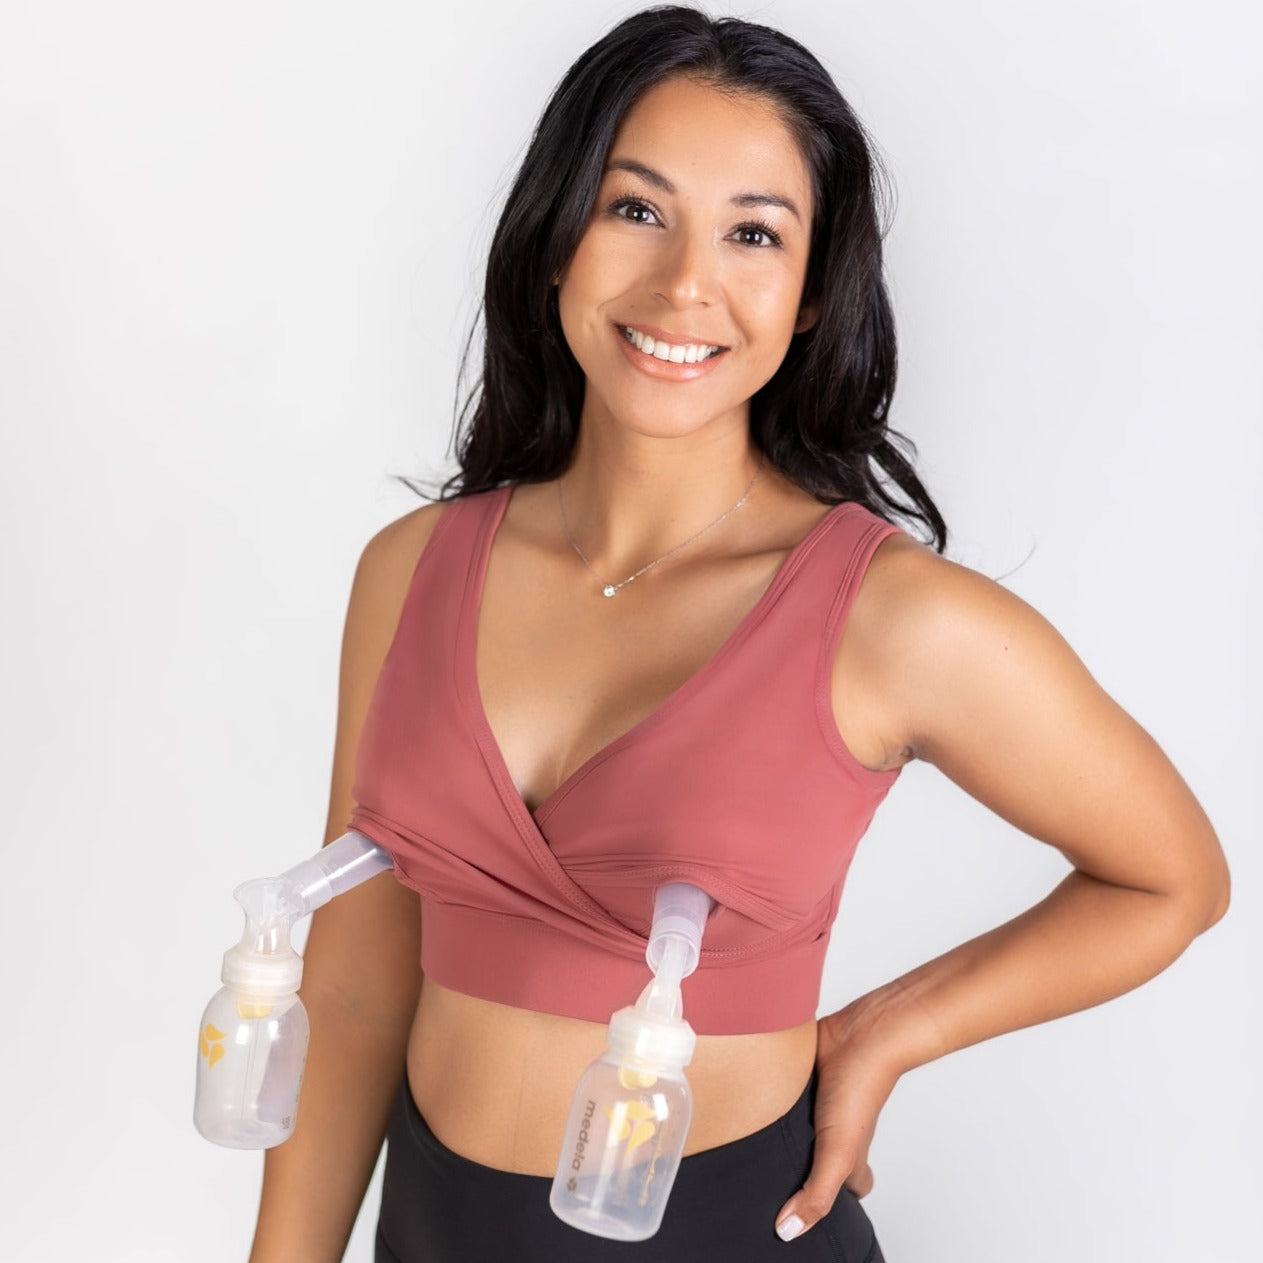 Everyday Luxe 2.0 Nursing & Hands-Free Pumping Bra Collection – Love and Fit